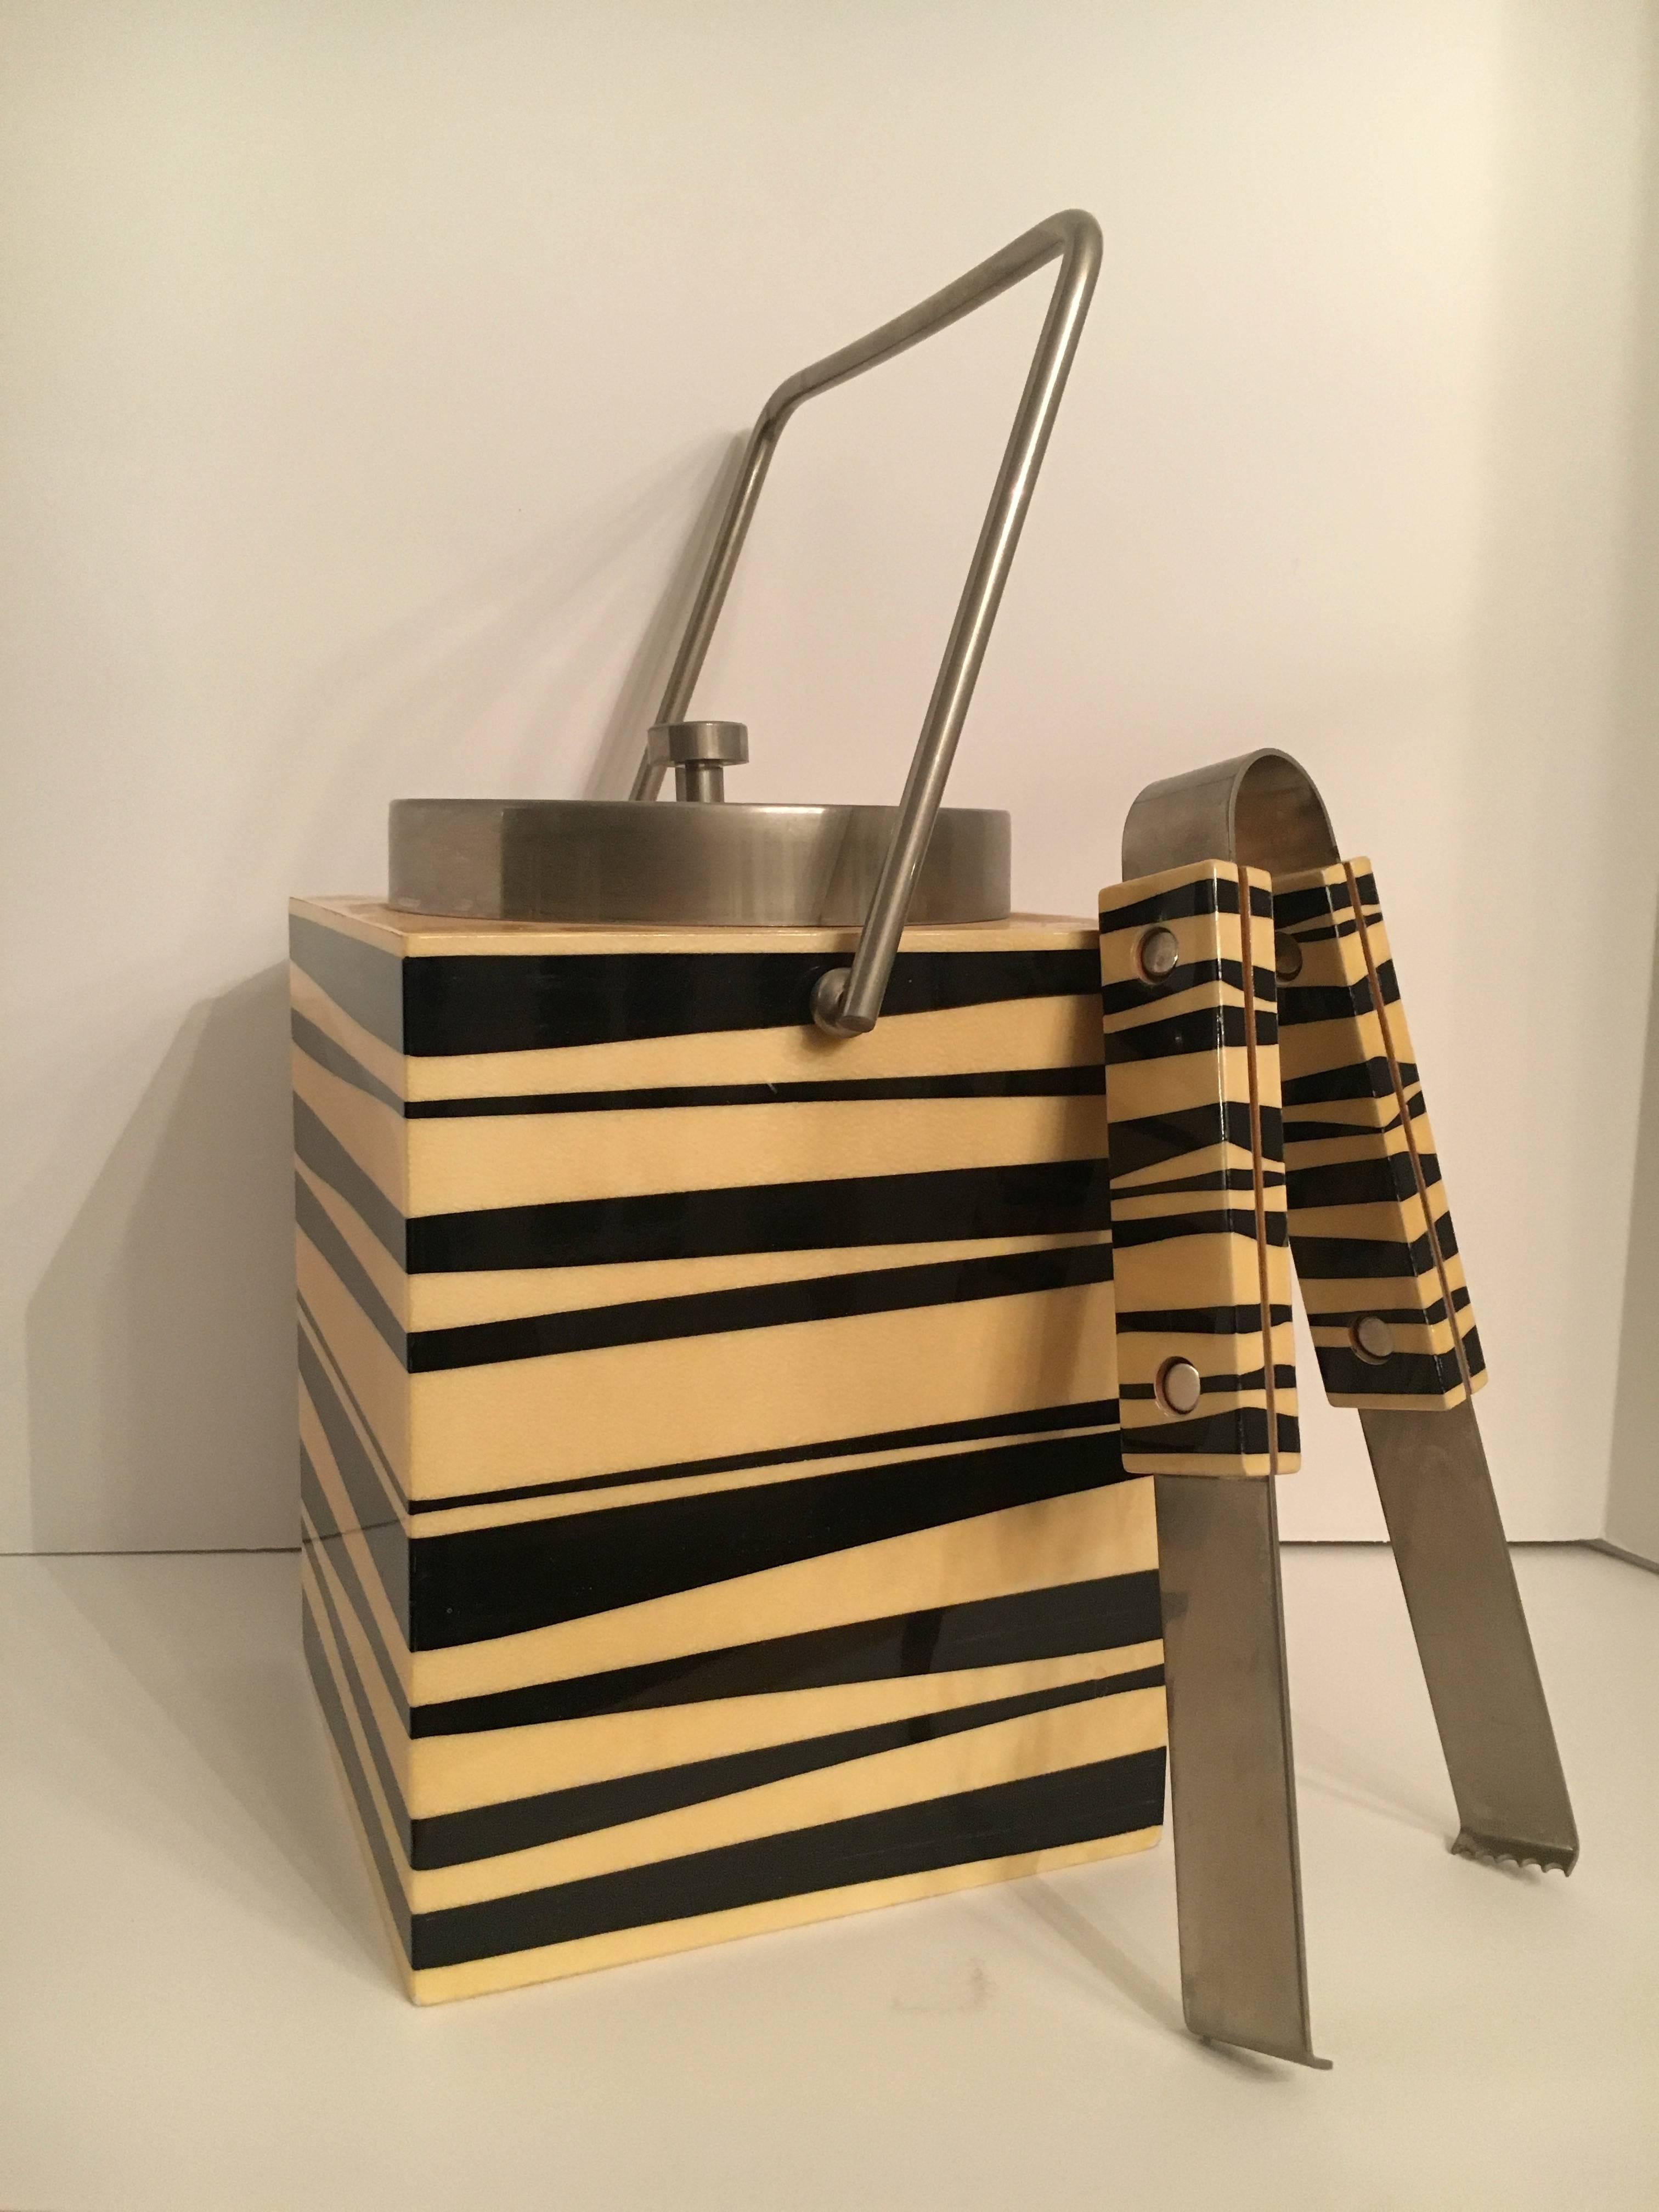 Aldo Tura goatskin ice bucket with tongs, this ice bucket really is the ice breaker, we gasped when we found this jewel! The beautifully designed bucket with modern striped reminiscent of something between animal and high style made us want a stiff